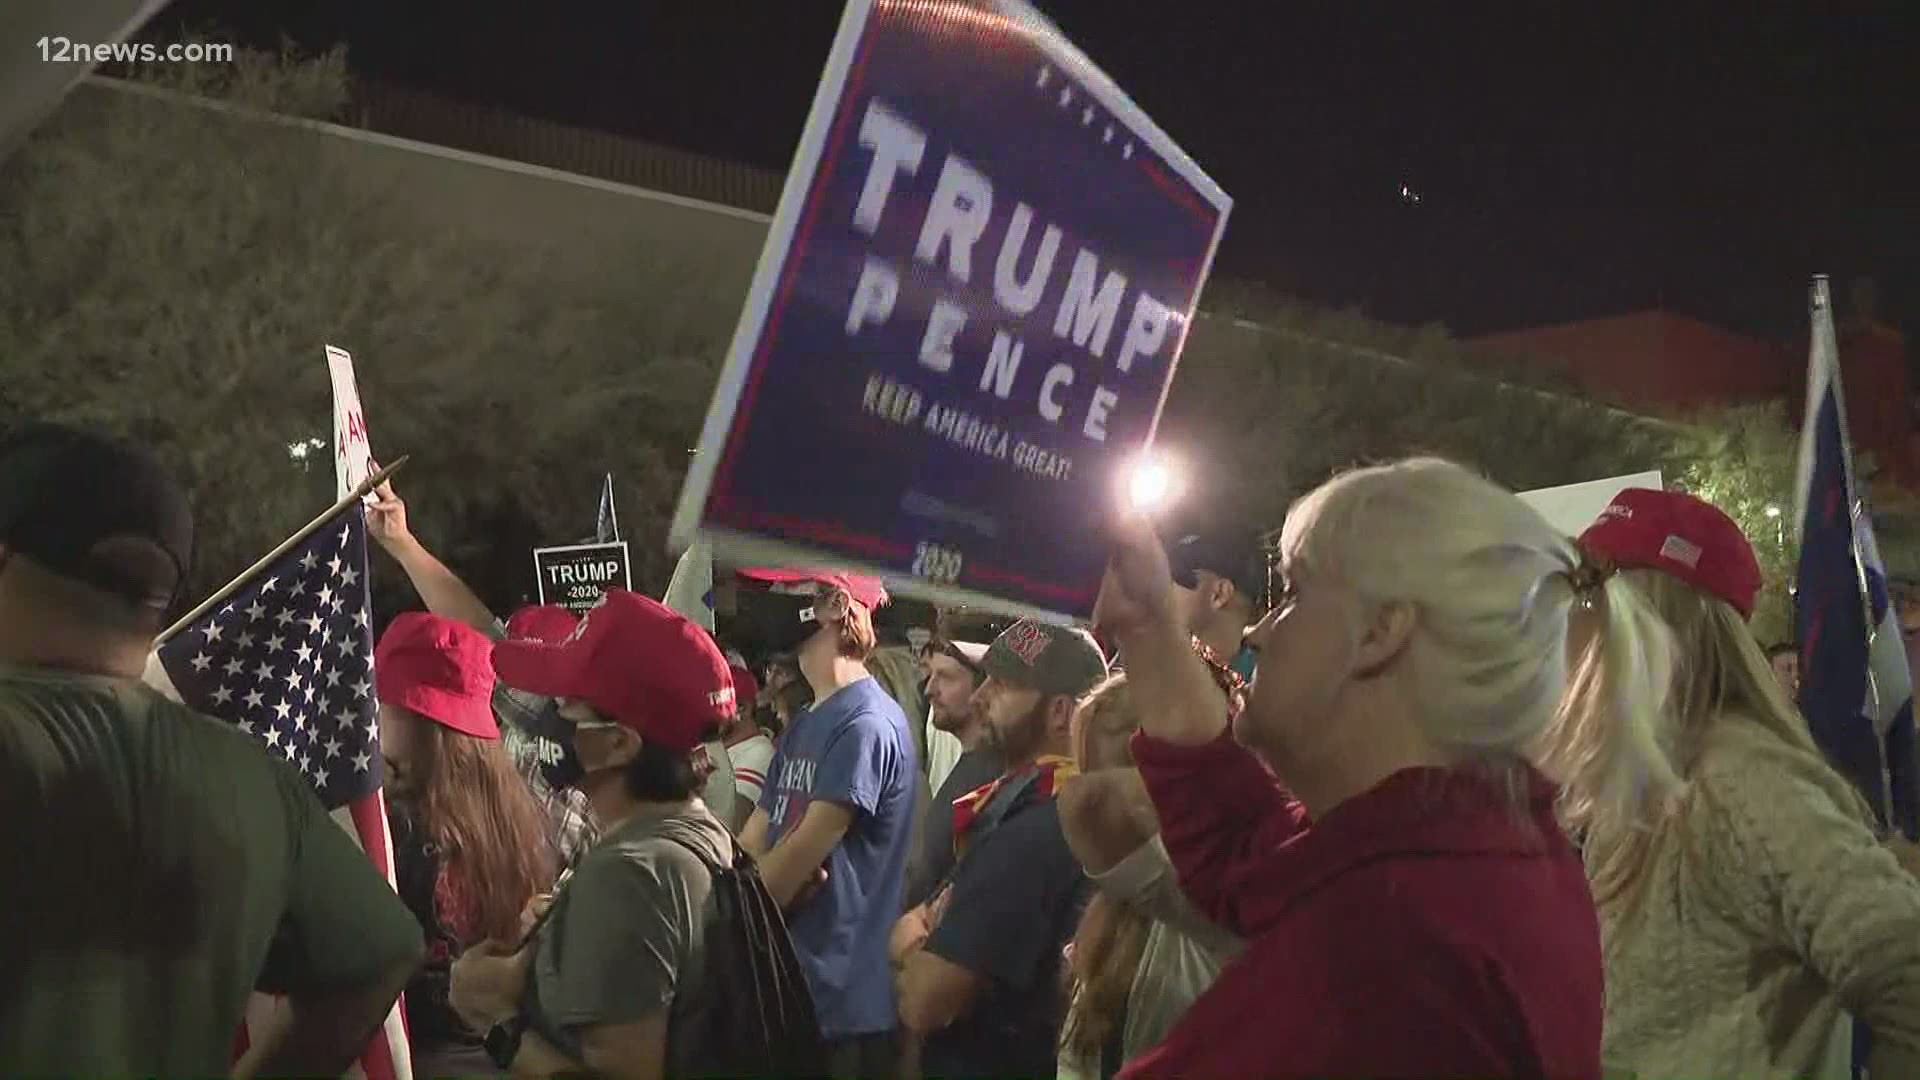 Over 100 President Trump supporters gathered to protest the results of the election after the Associated Press declared Joe Biden the winner in Arizona.